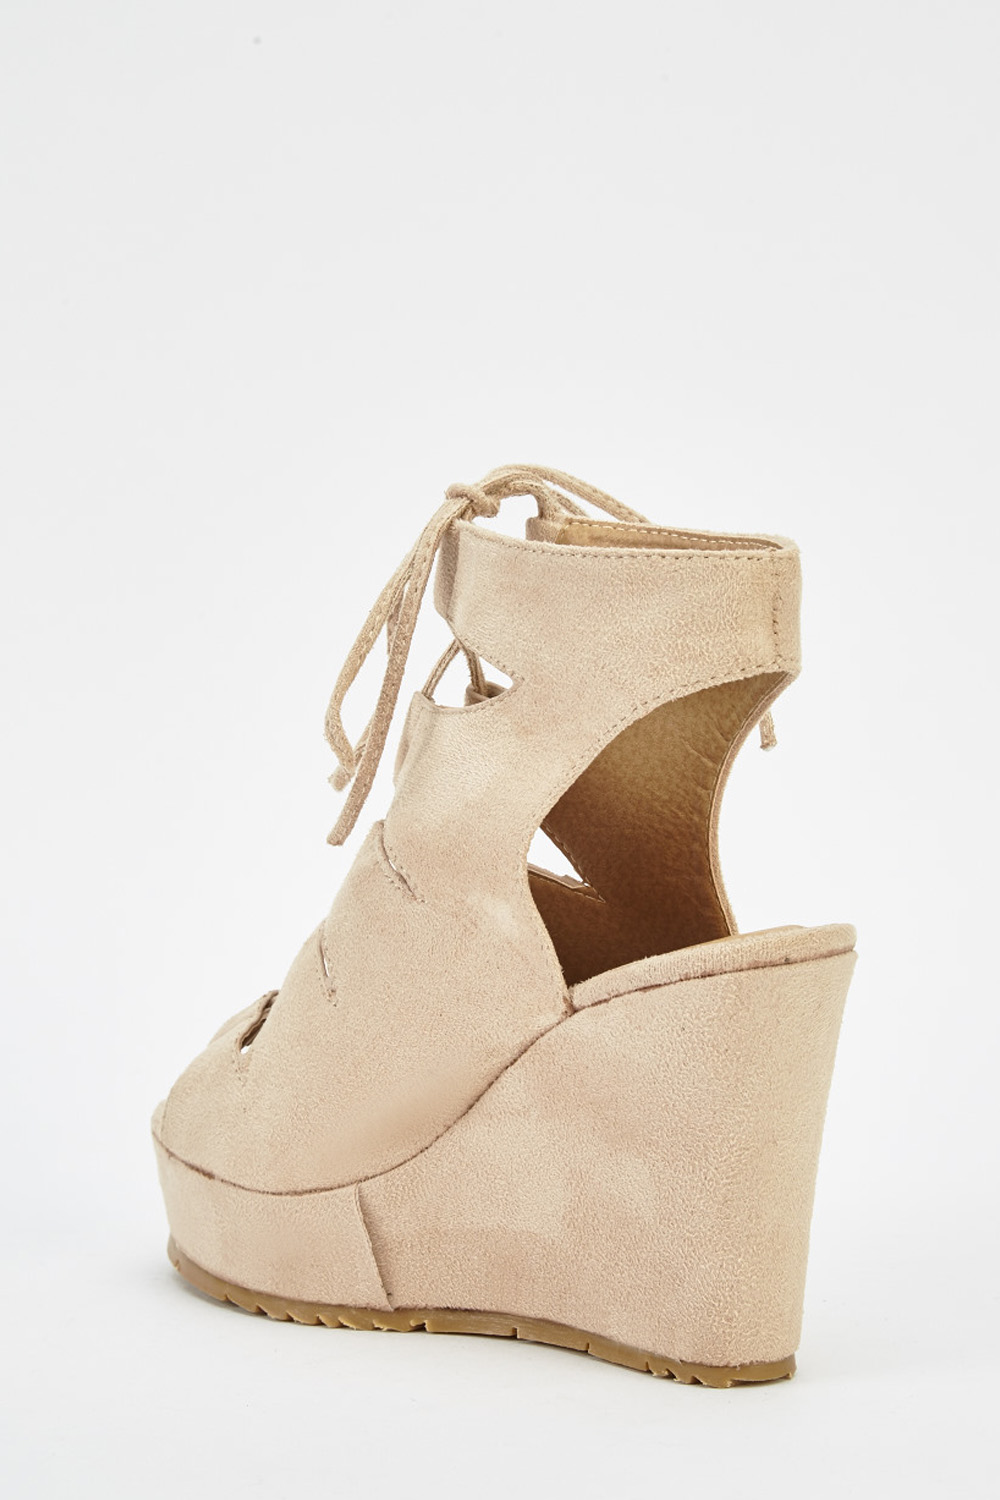 Nude Suedette Wedge Shoes - Just $7